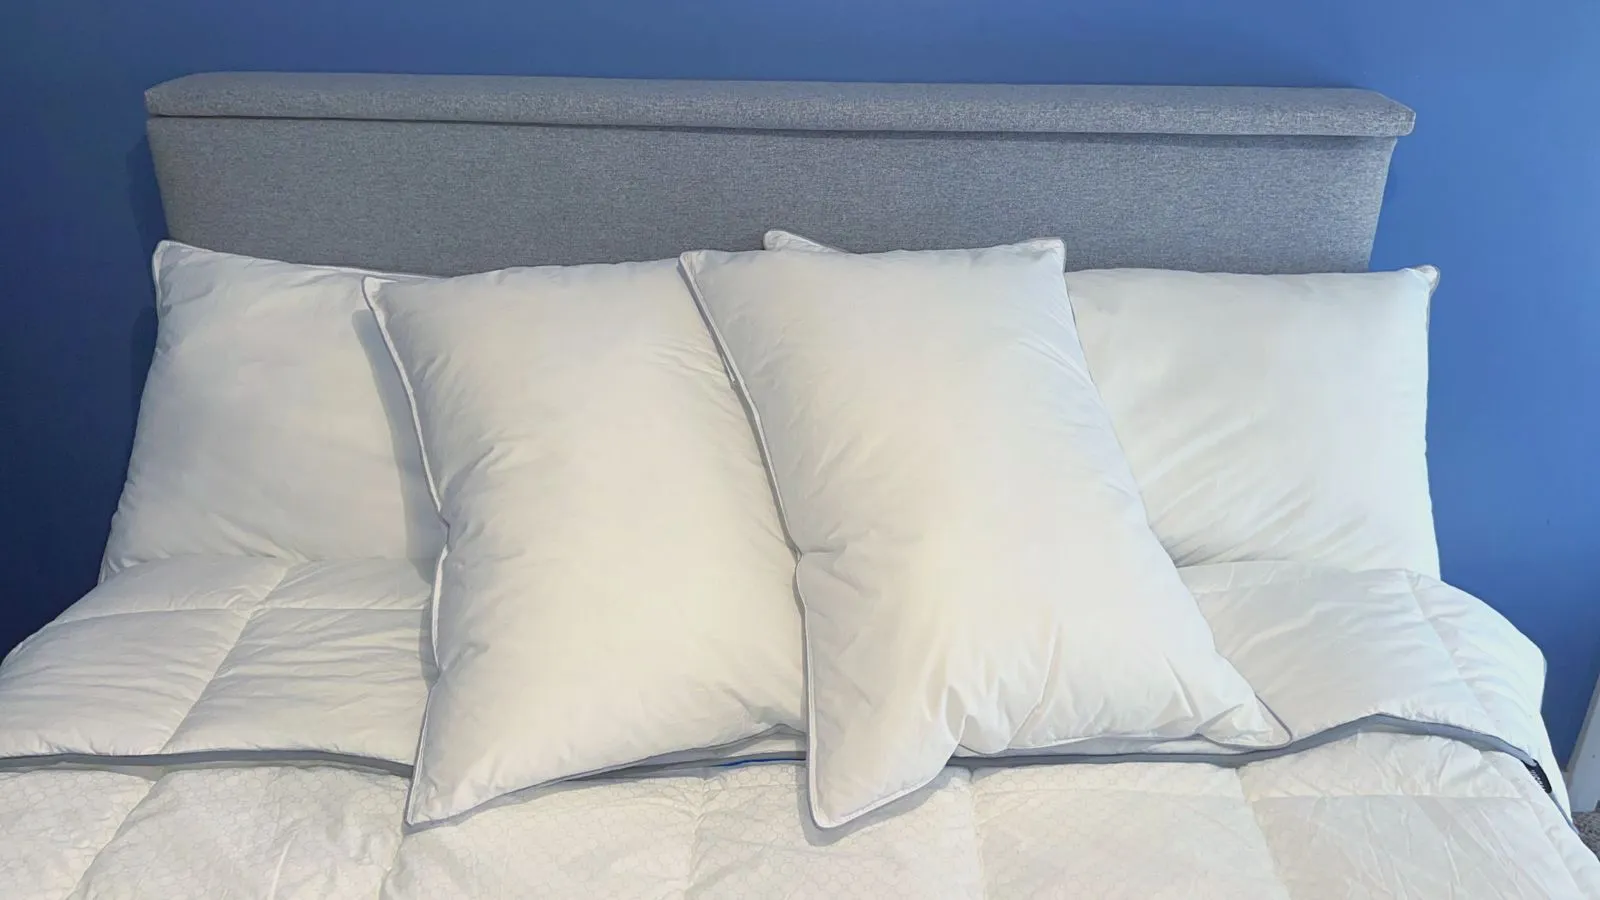 FluffCo pillows over the bed in the Sleepiverse studio